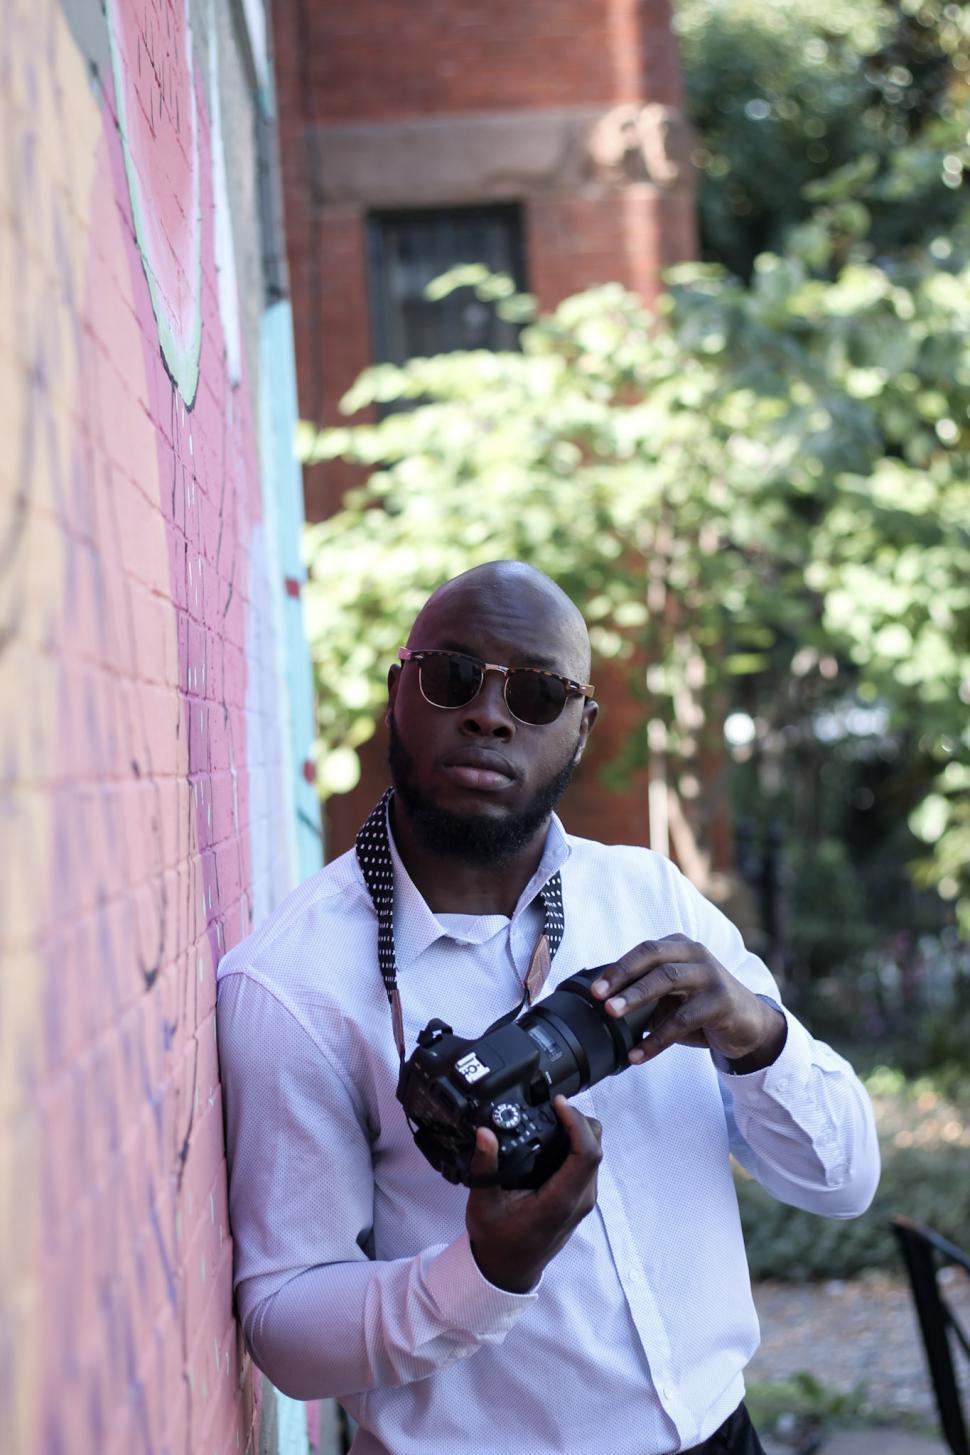 Free Image of Young Bald Man in white shirt holding professional camera - look 